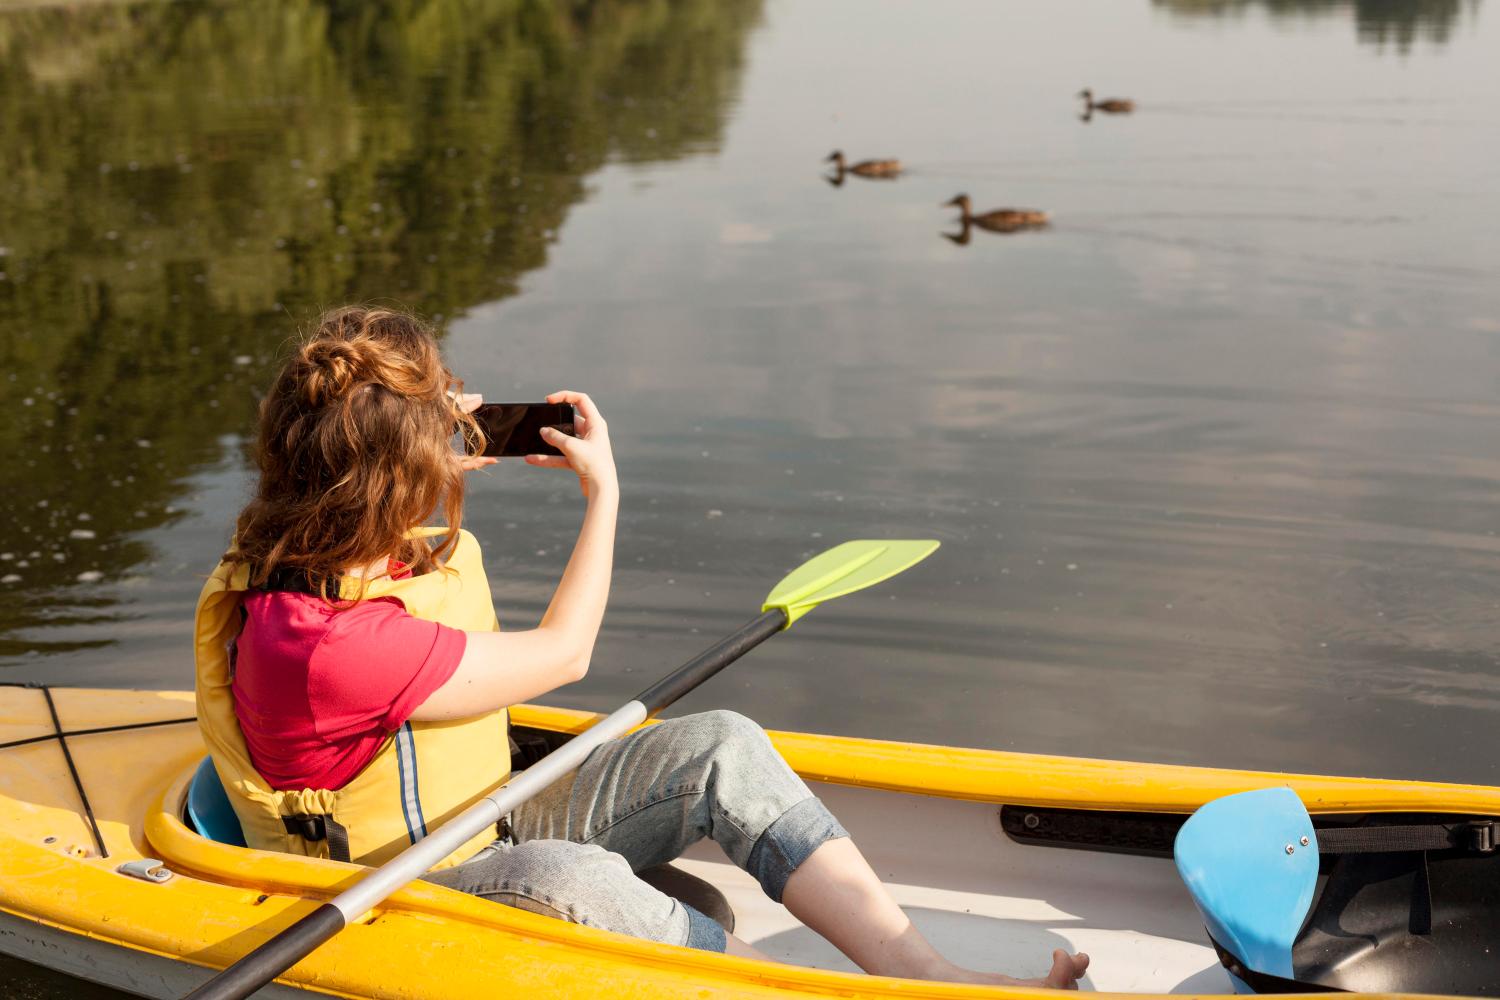 2 - A woman on a boat, snapping photos of swans